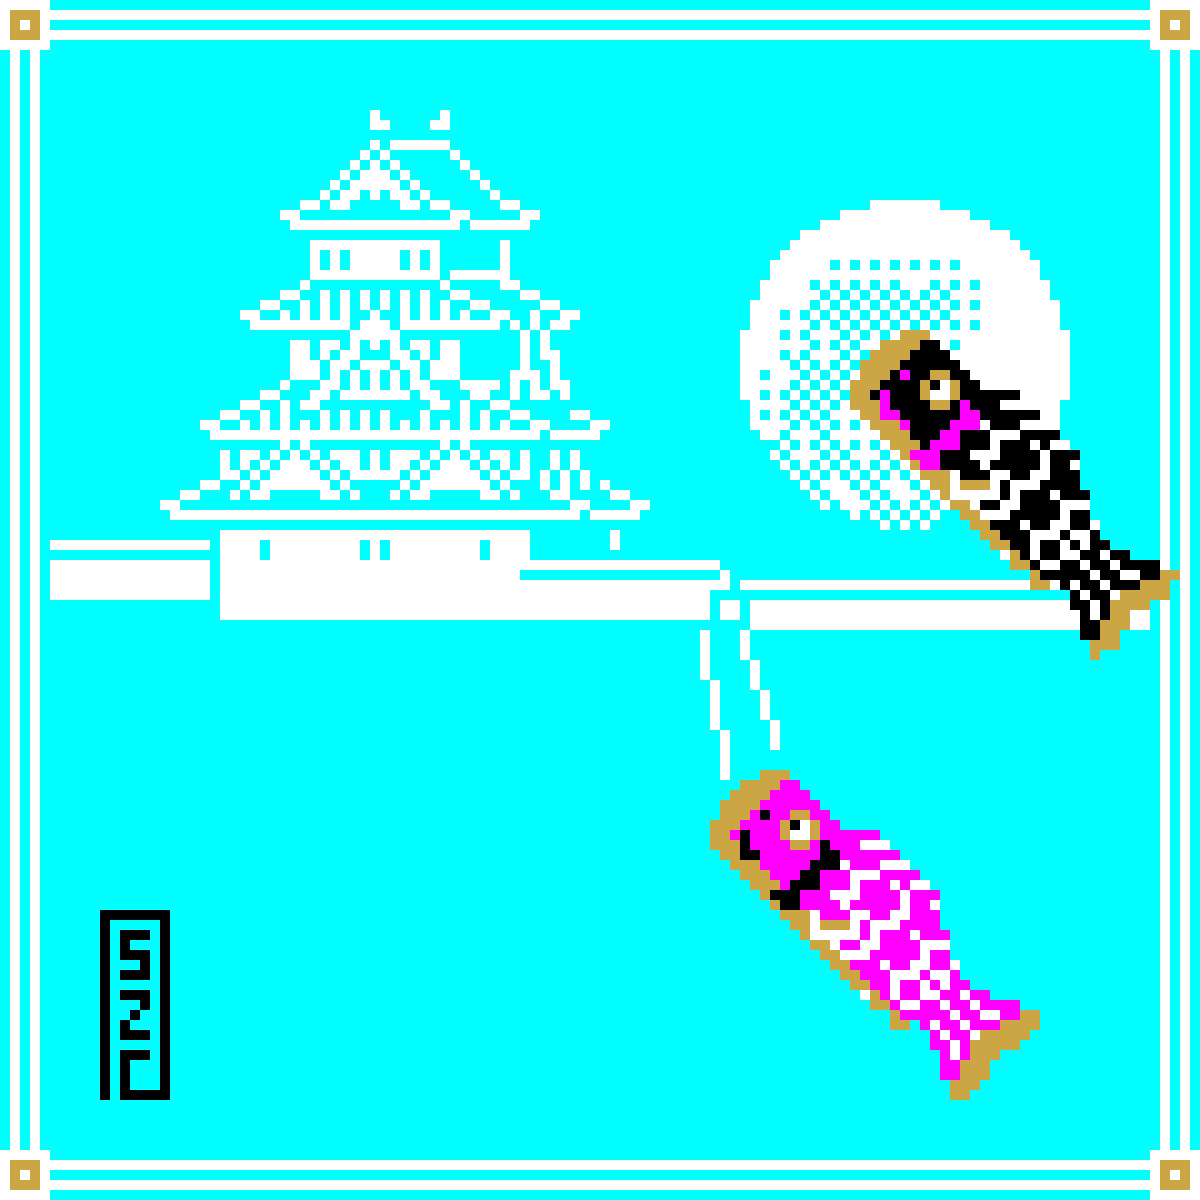 Koinobori (Carp streamer) is displayed outside in May to pray for the success and health of boys.
This was drawn based on one made in Gujo City, Gifu Prefecture, in the late Showa period.

#pixelart #japaneseculture #koinobori #ドット絵